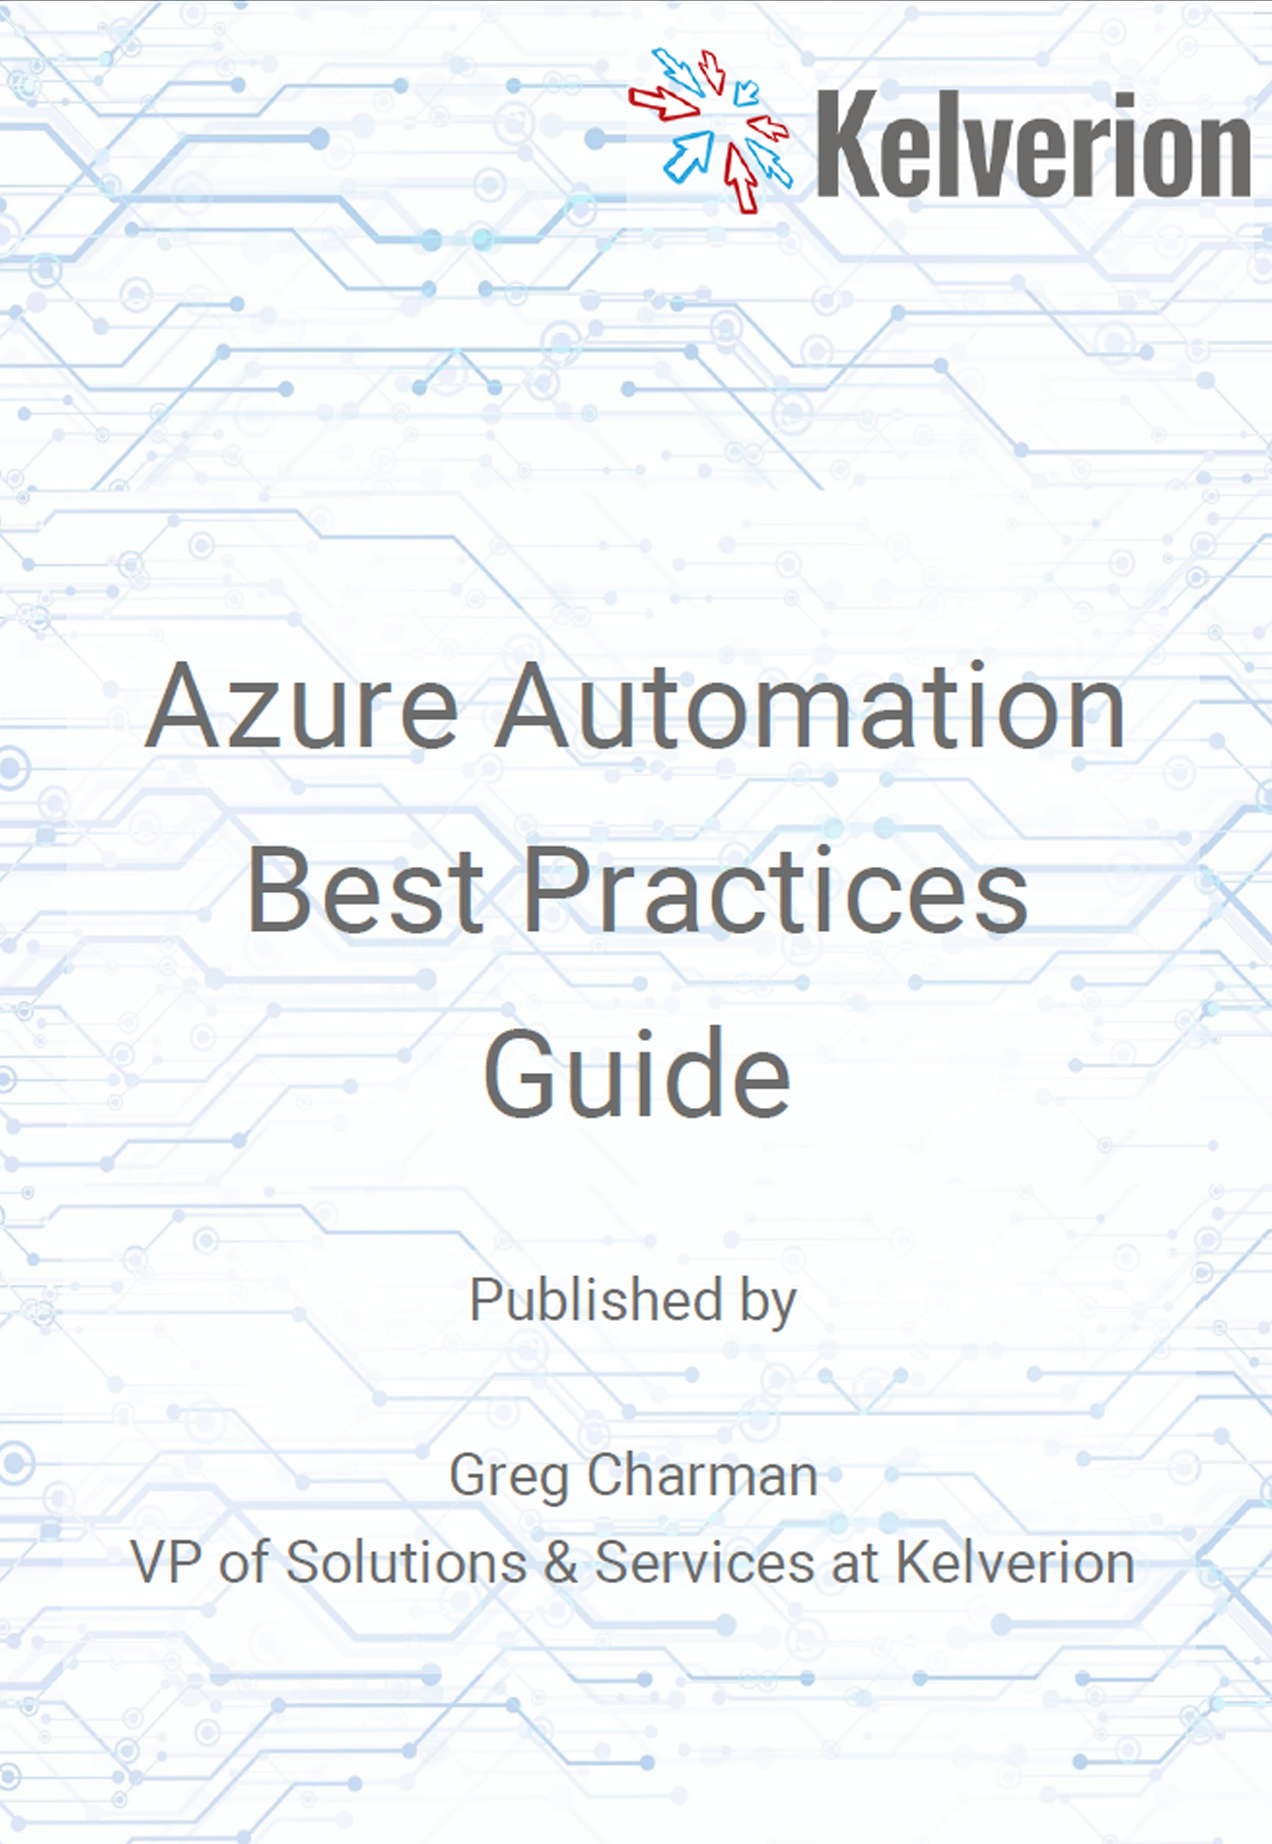 Azure Automation Best Practices Guide